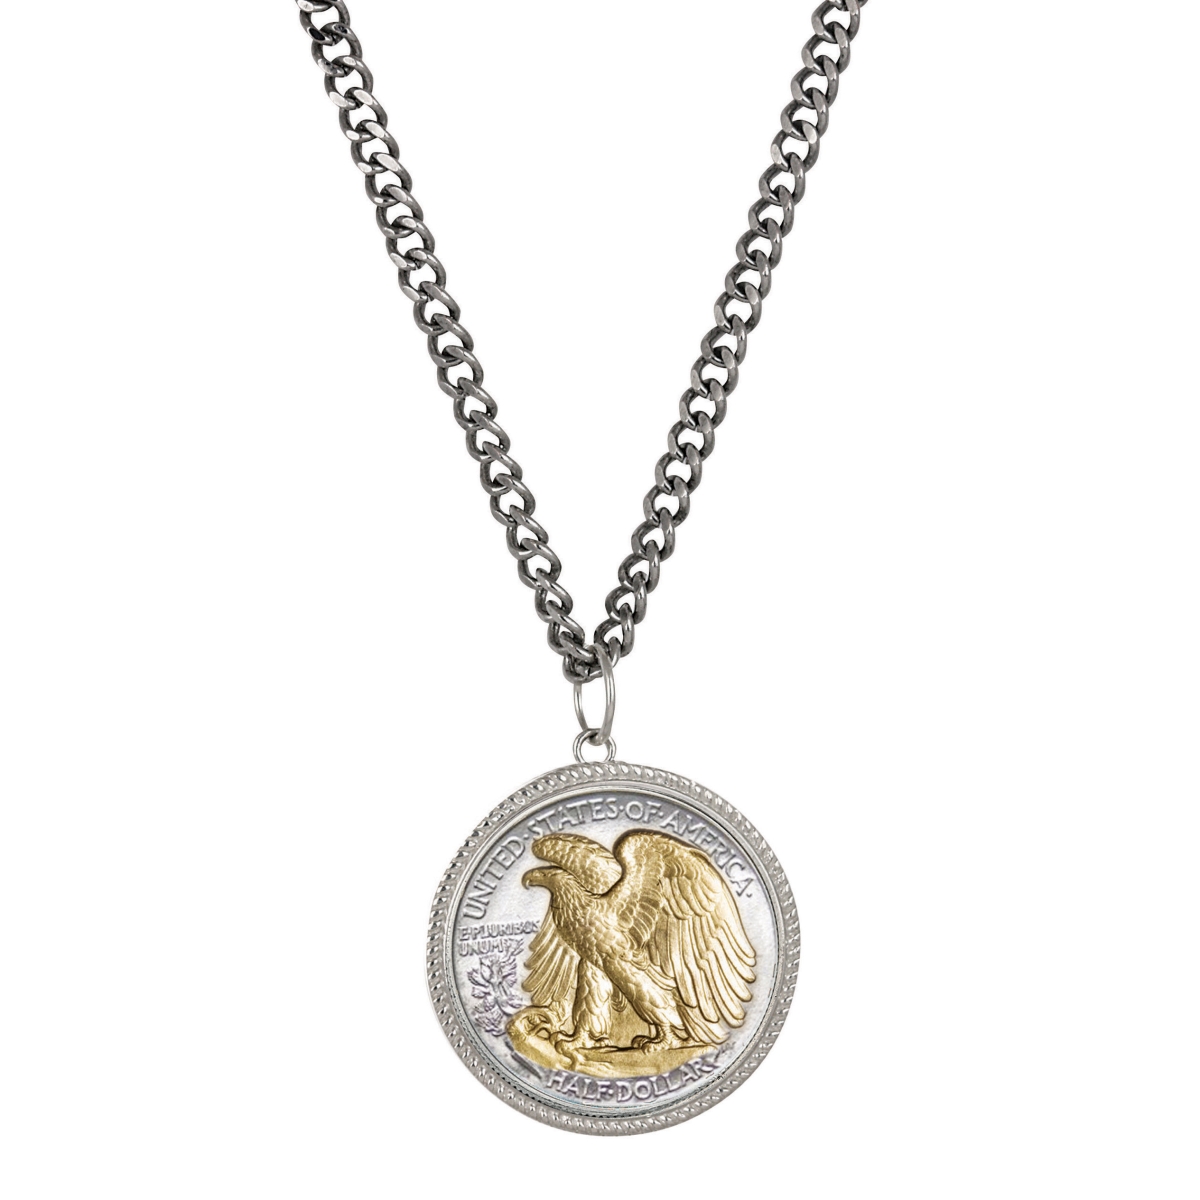 Picture of American Coin Treasures 16364 Walking Liberty Silver Half Dollar Pendant with Curb Chain for Men - Reverse 2 Tone Plating